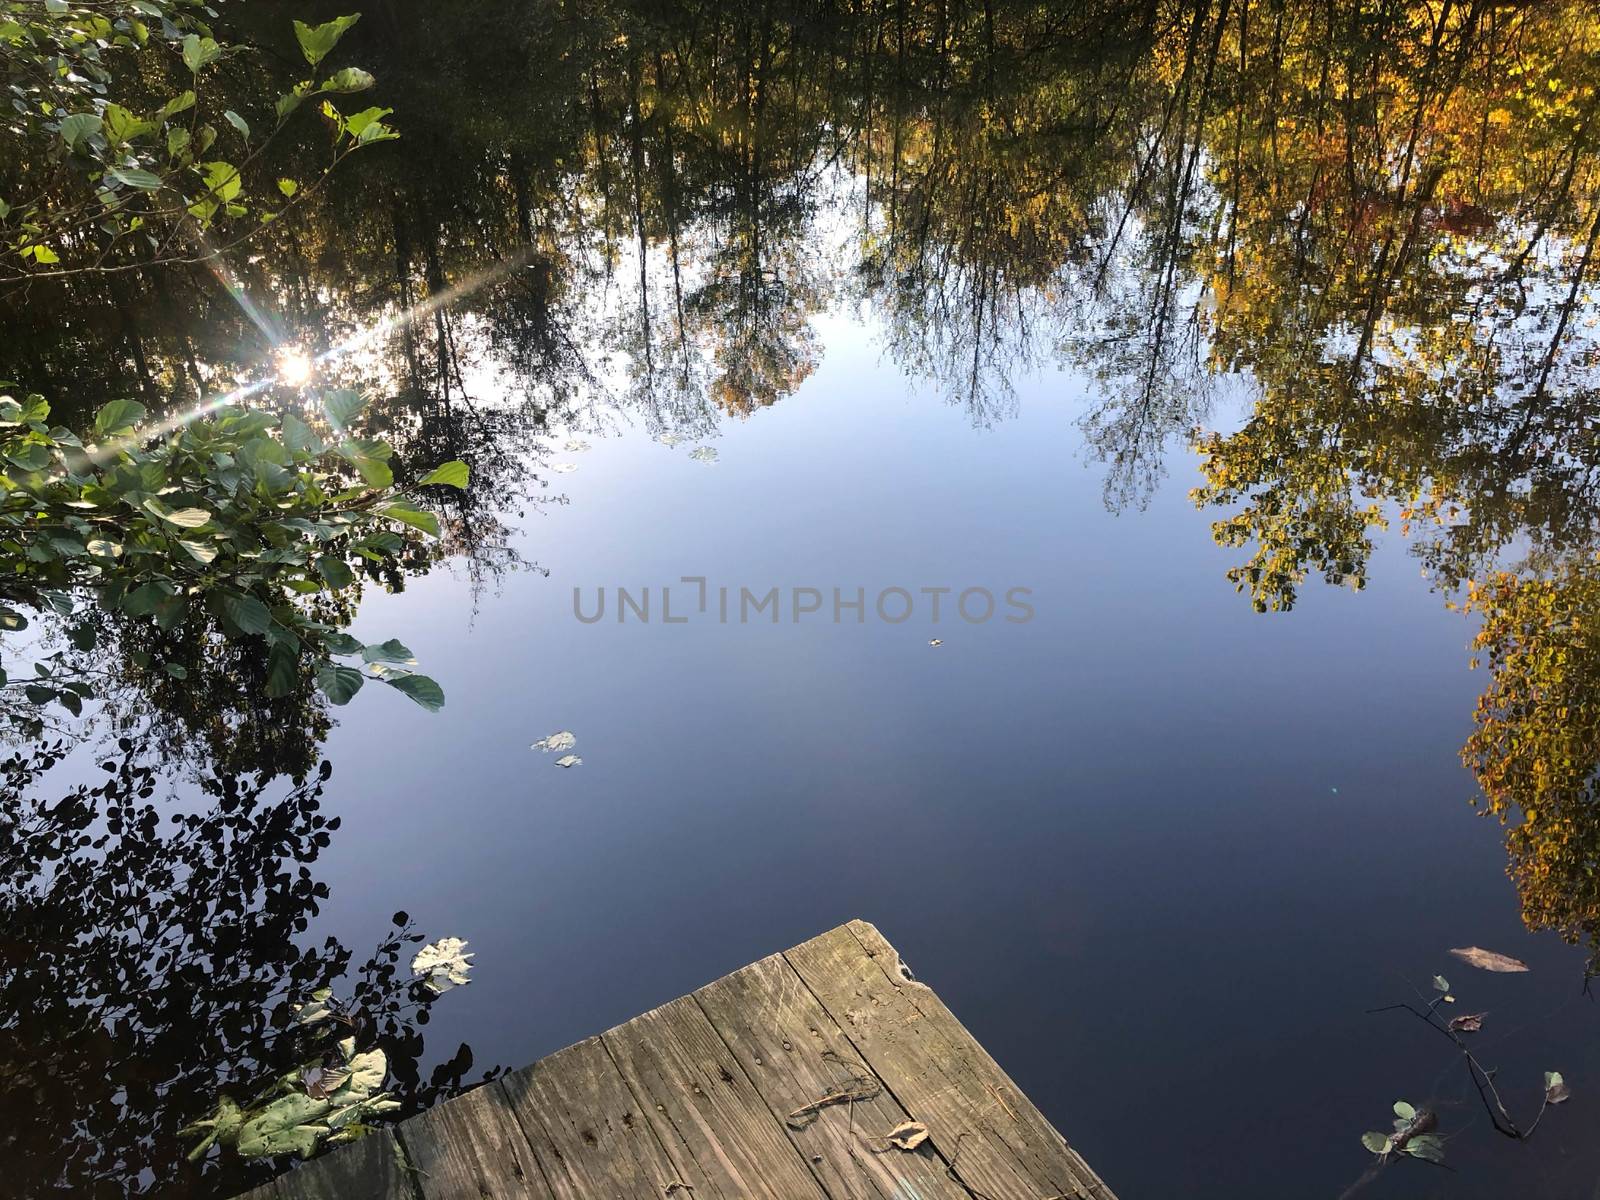 Autumn leaves and blue sky are reflected in a woodland lake circling a blue center, wooden dock in foreground. Great copy space.